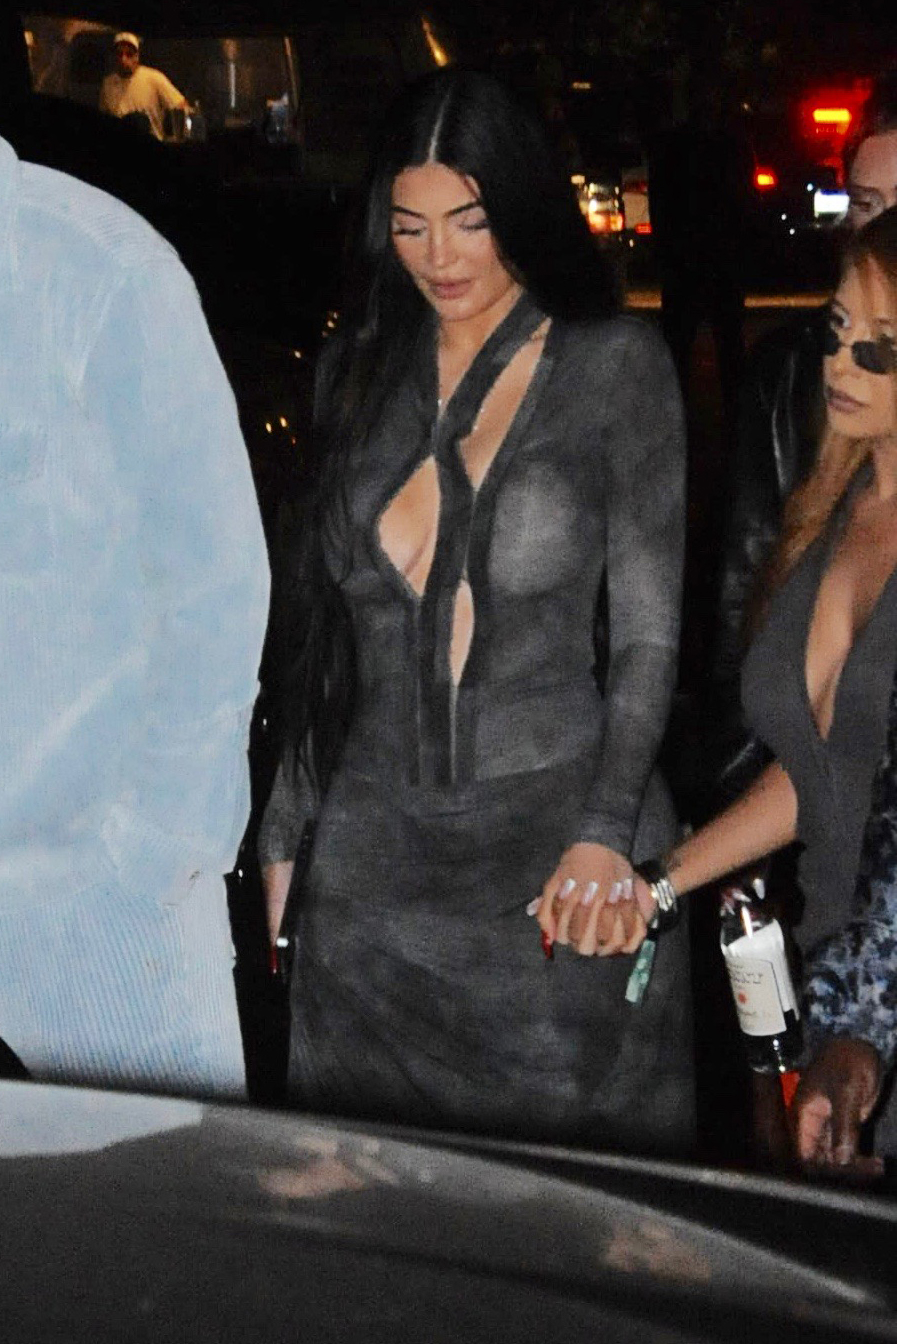 Kim Kardashian Steps Out at 818 Tequila Party After Pete Davidson Split: See Photos